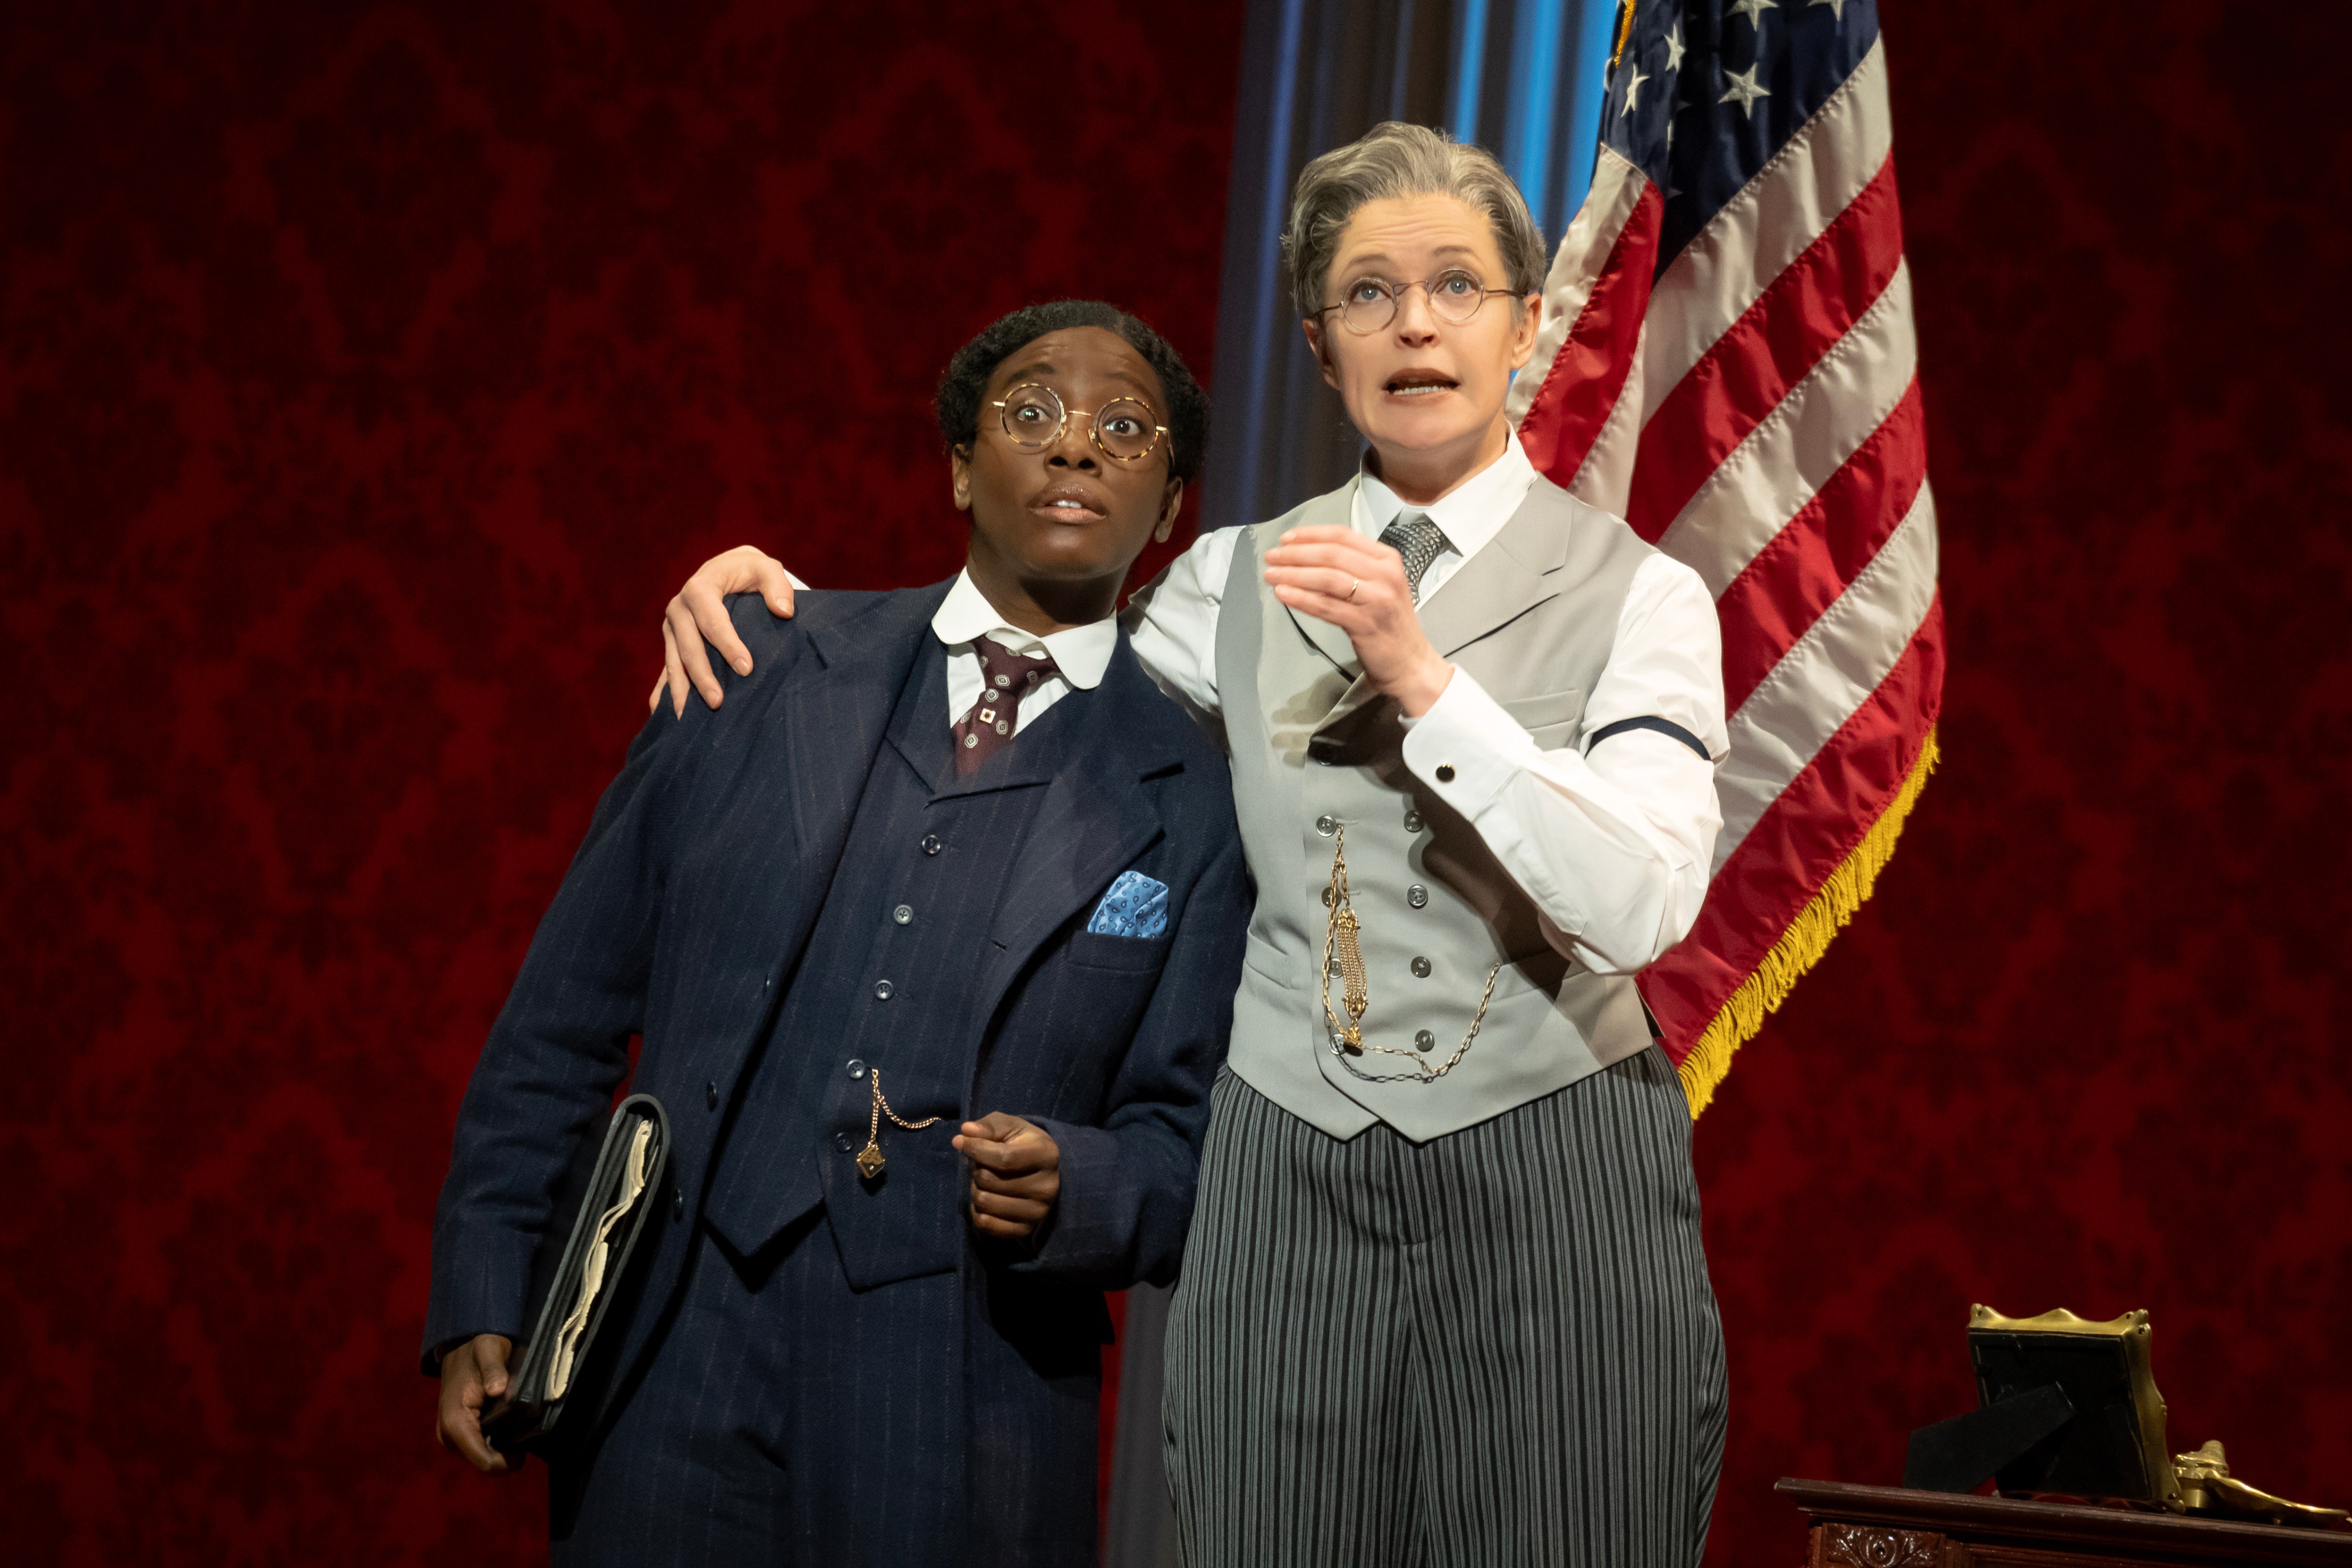 This is a thundering suffrage musical produced by Hillary Clinton